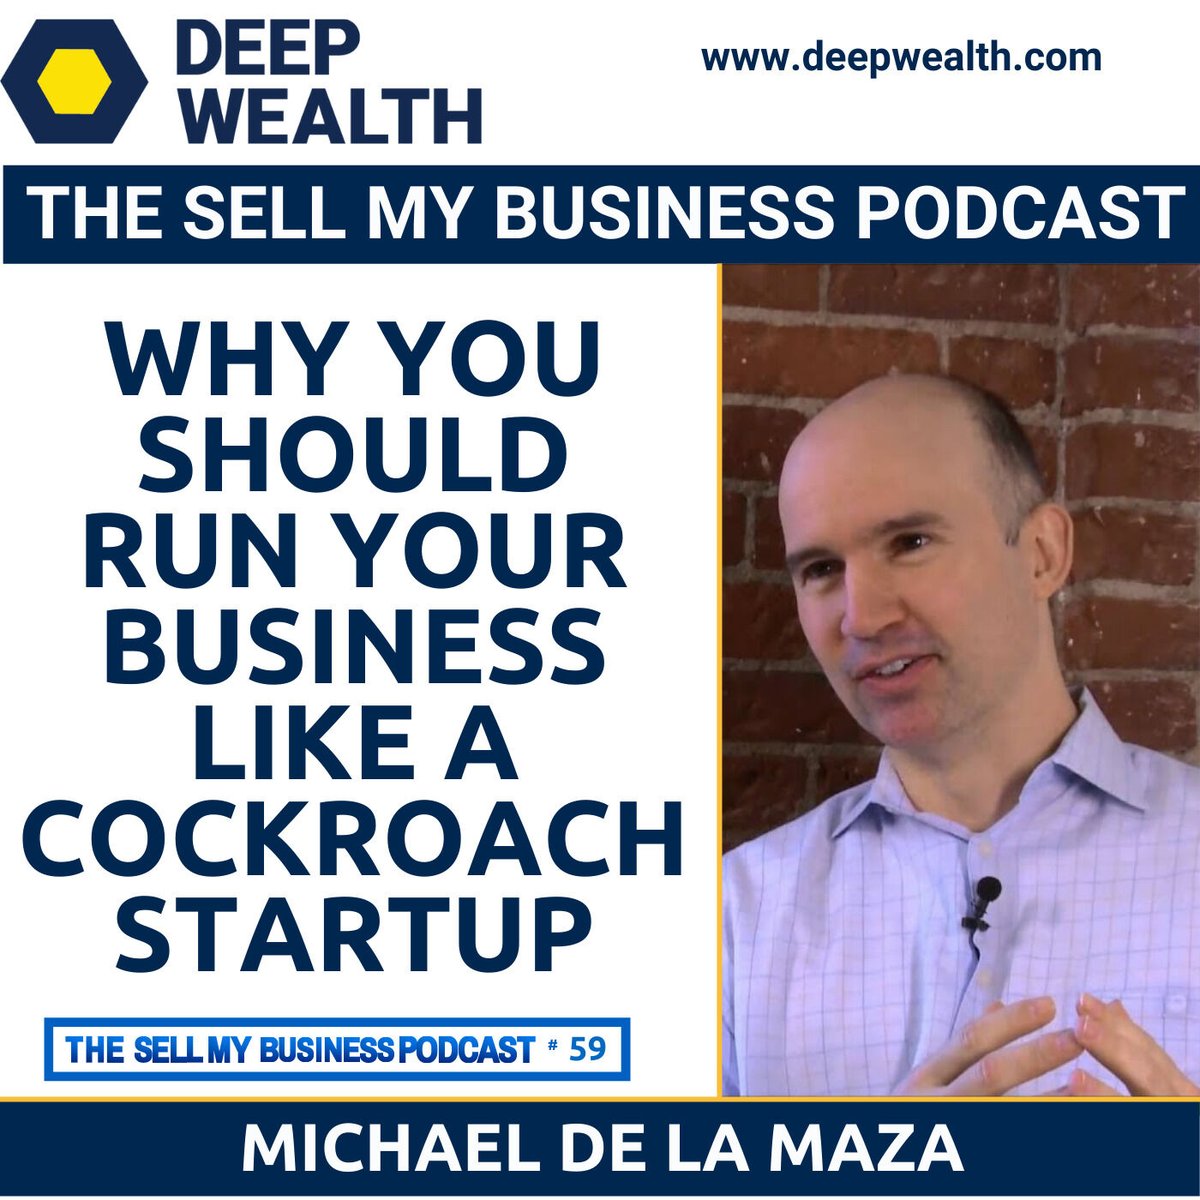 Why You Should Run Your Business Like A Cockroach Startup According To Successful Entrepreneur and Investor Michael de la Maza (#59) iapdw.com/2o1 #DeepWealth #BusinessSuccess